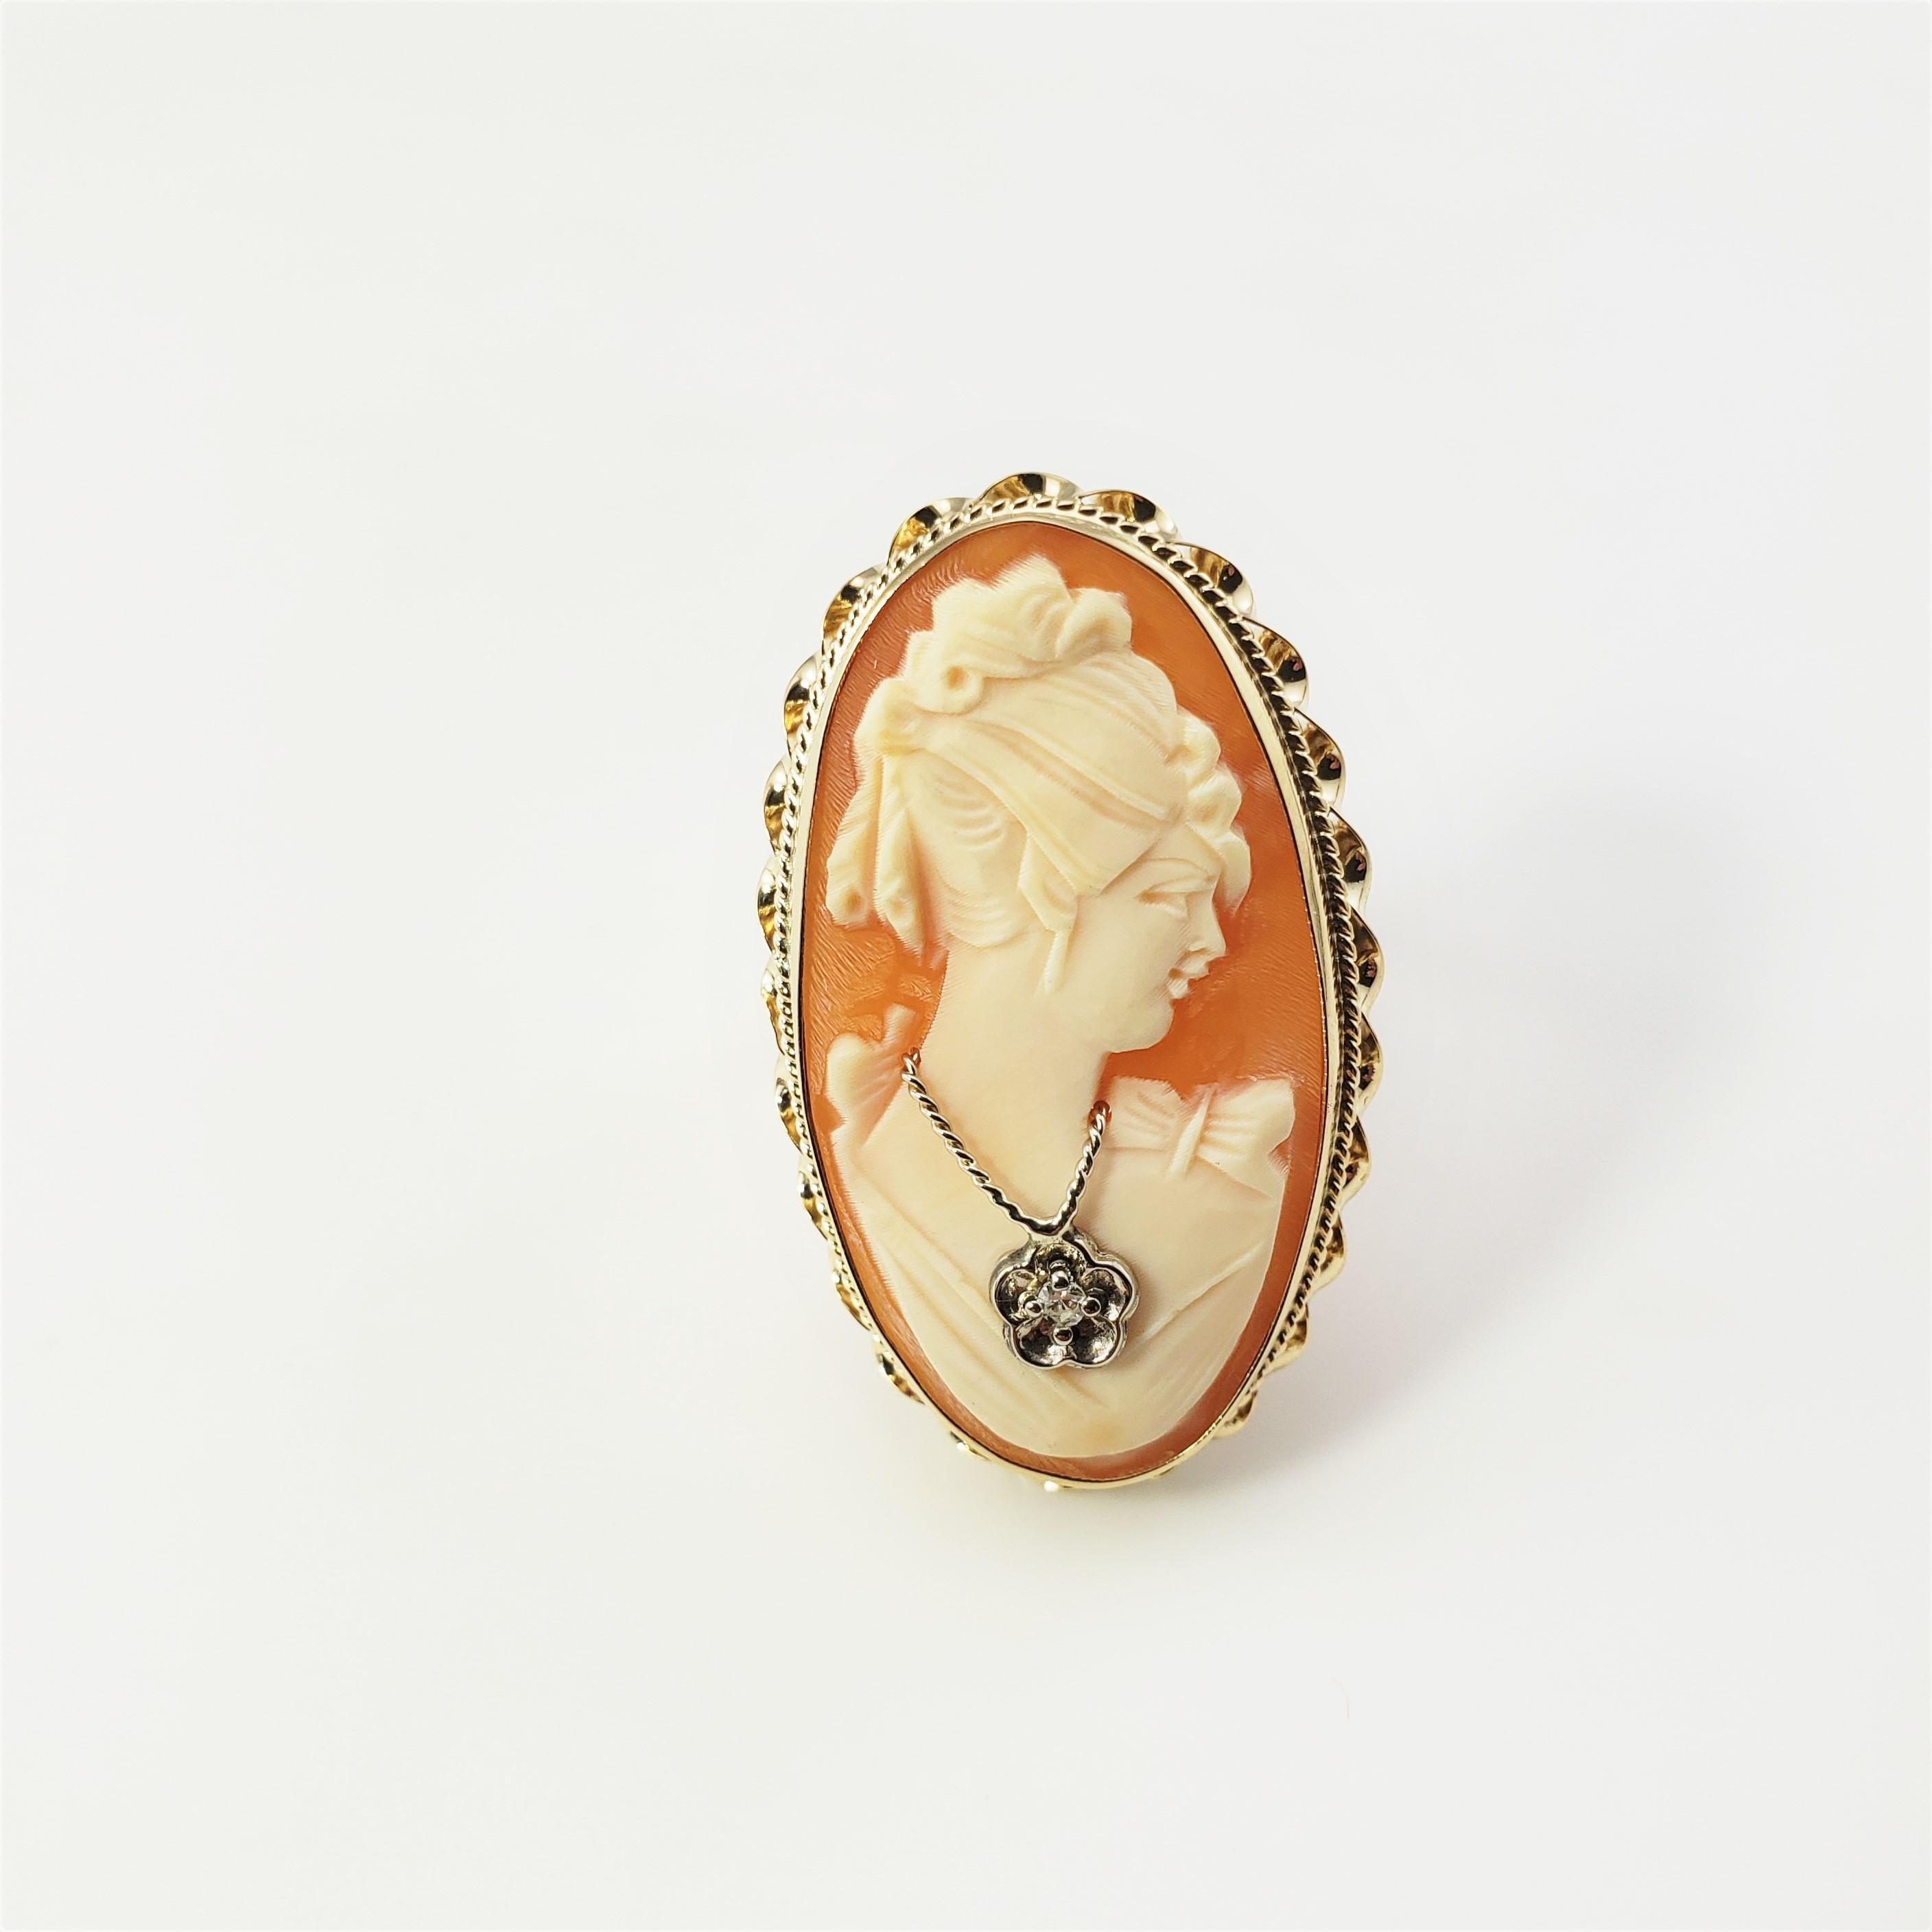 14 Karat Yellow Gold and Diamond Cameo Ring Size 8.75-

This lovely cameo ring features a lovely lady in profile accented with one round single cut diamond and set in classic 14K yellow gold. Top of ring measures 33 mm x 20 mm.  Shank measures 2.5